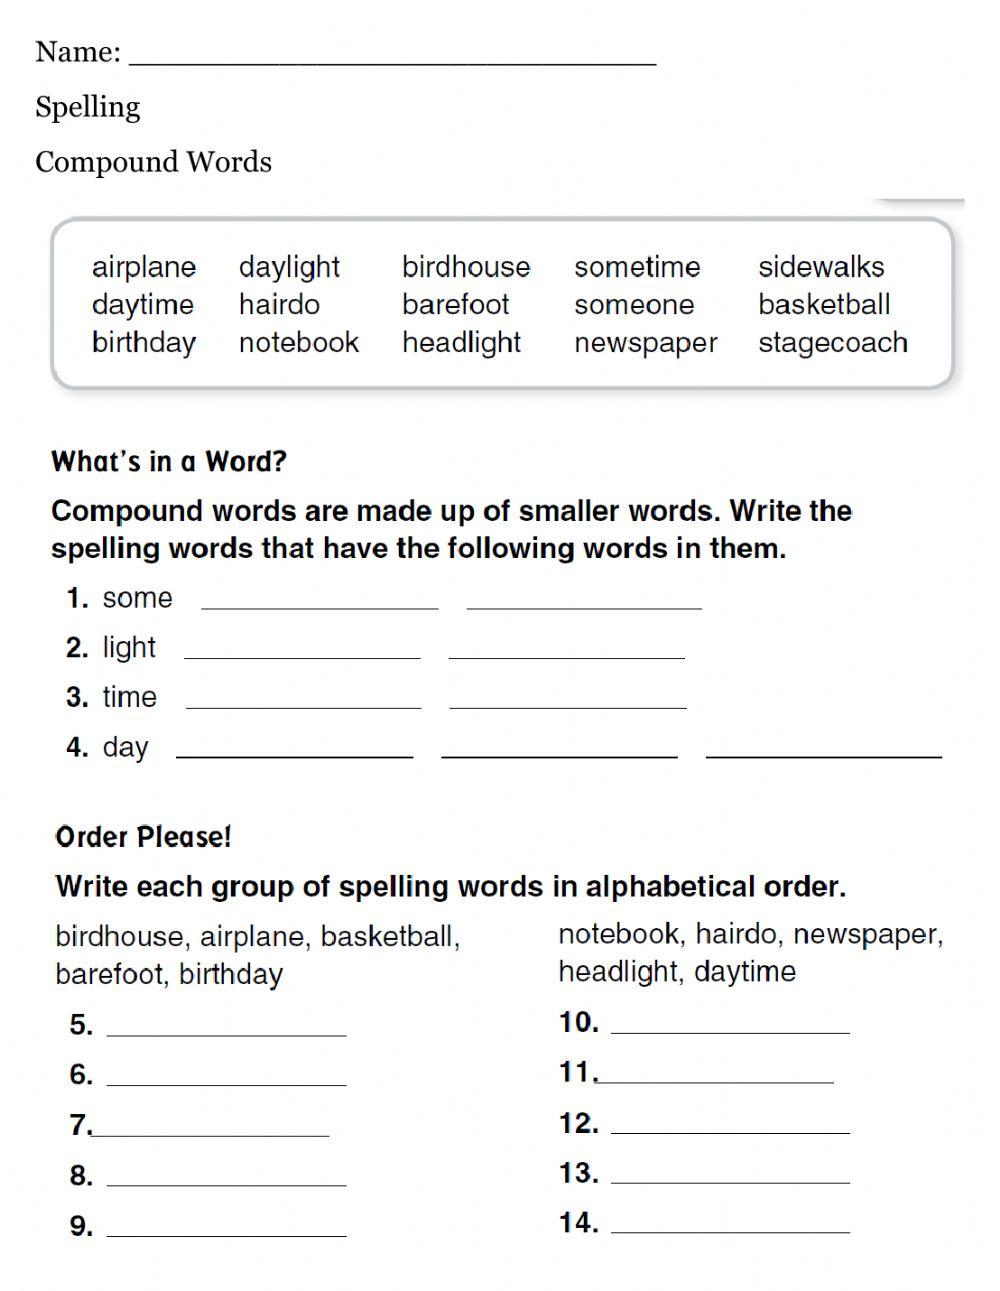 Spelling - Compound Words